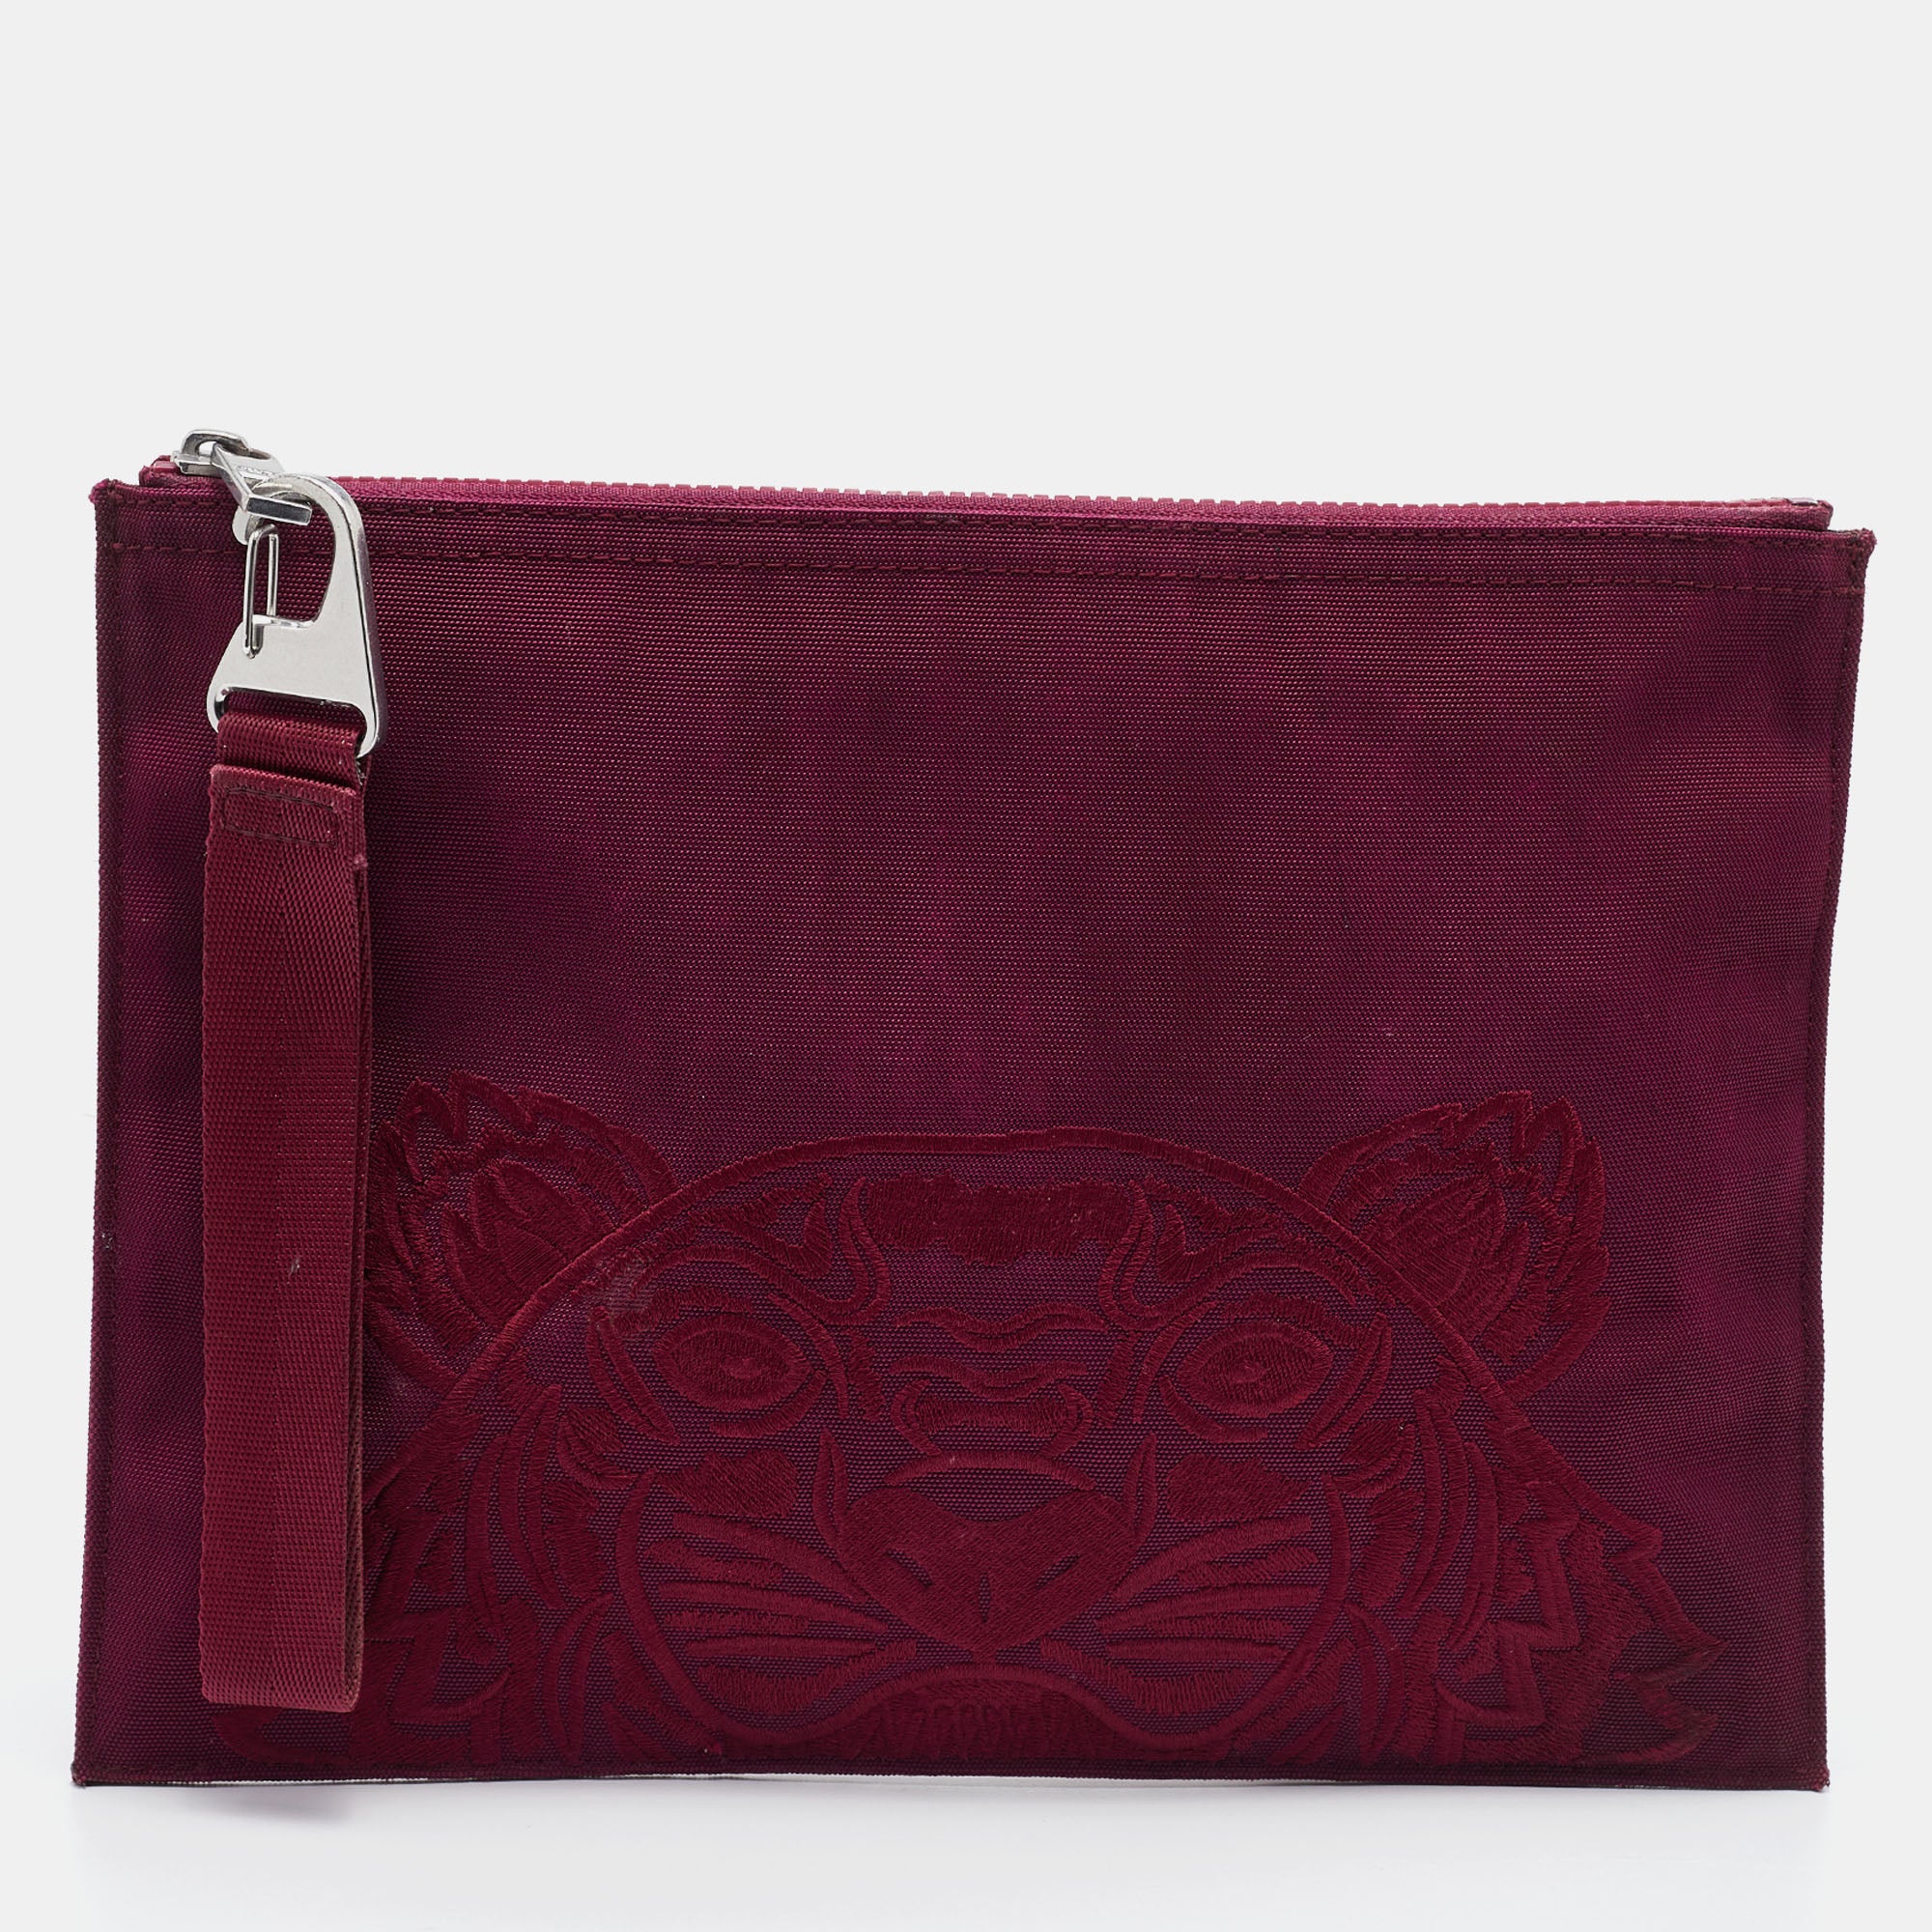 kenzo burgundy canvas tiger embroidery wristlet pouch